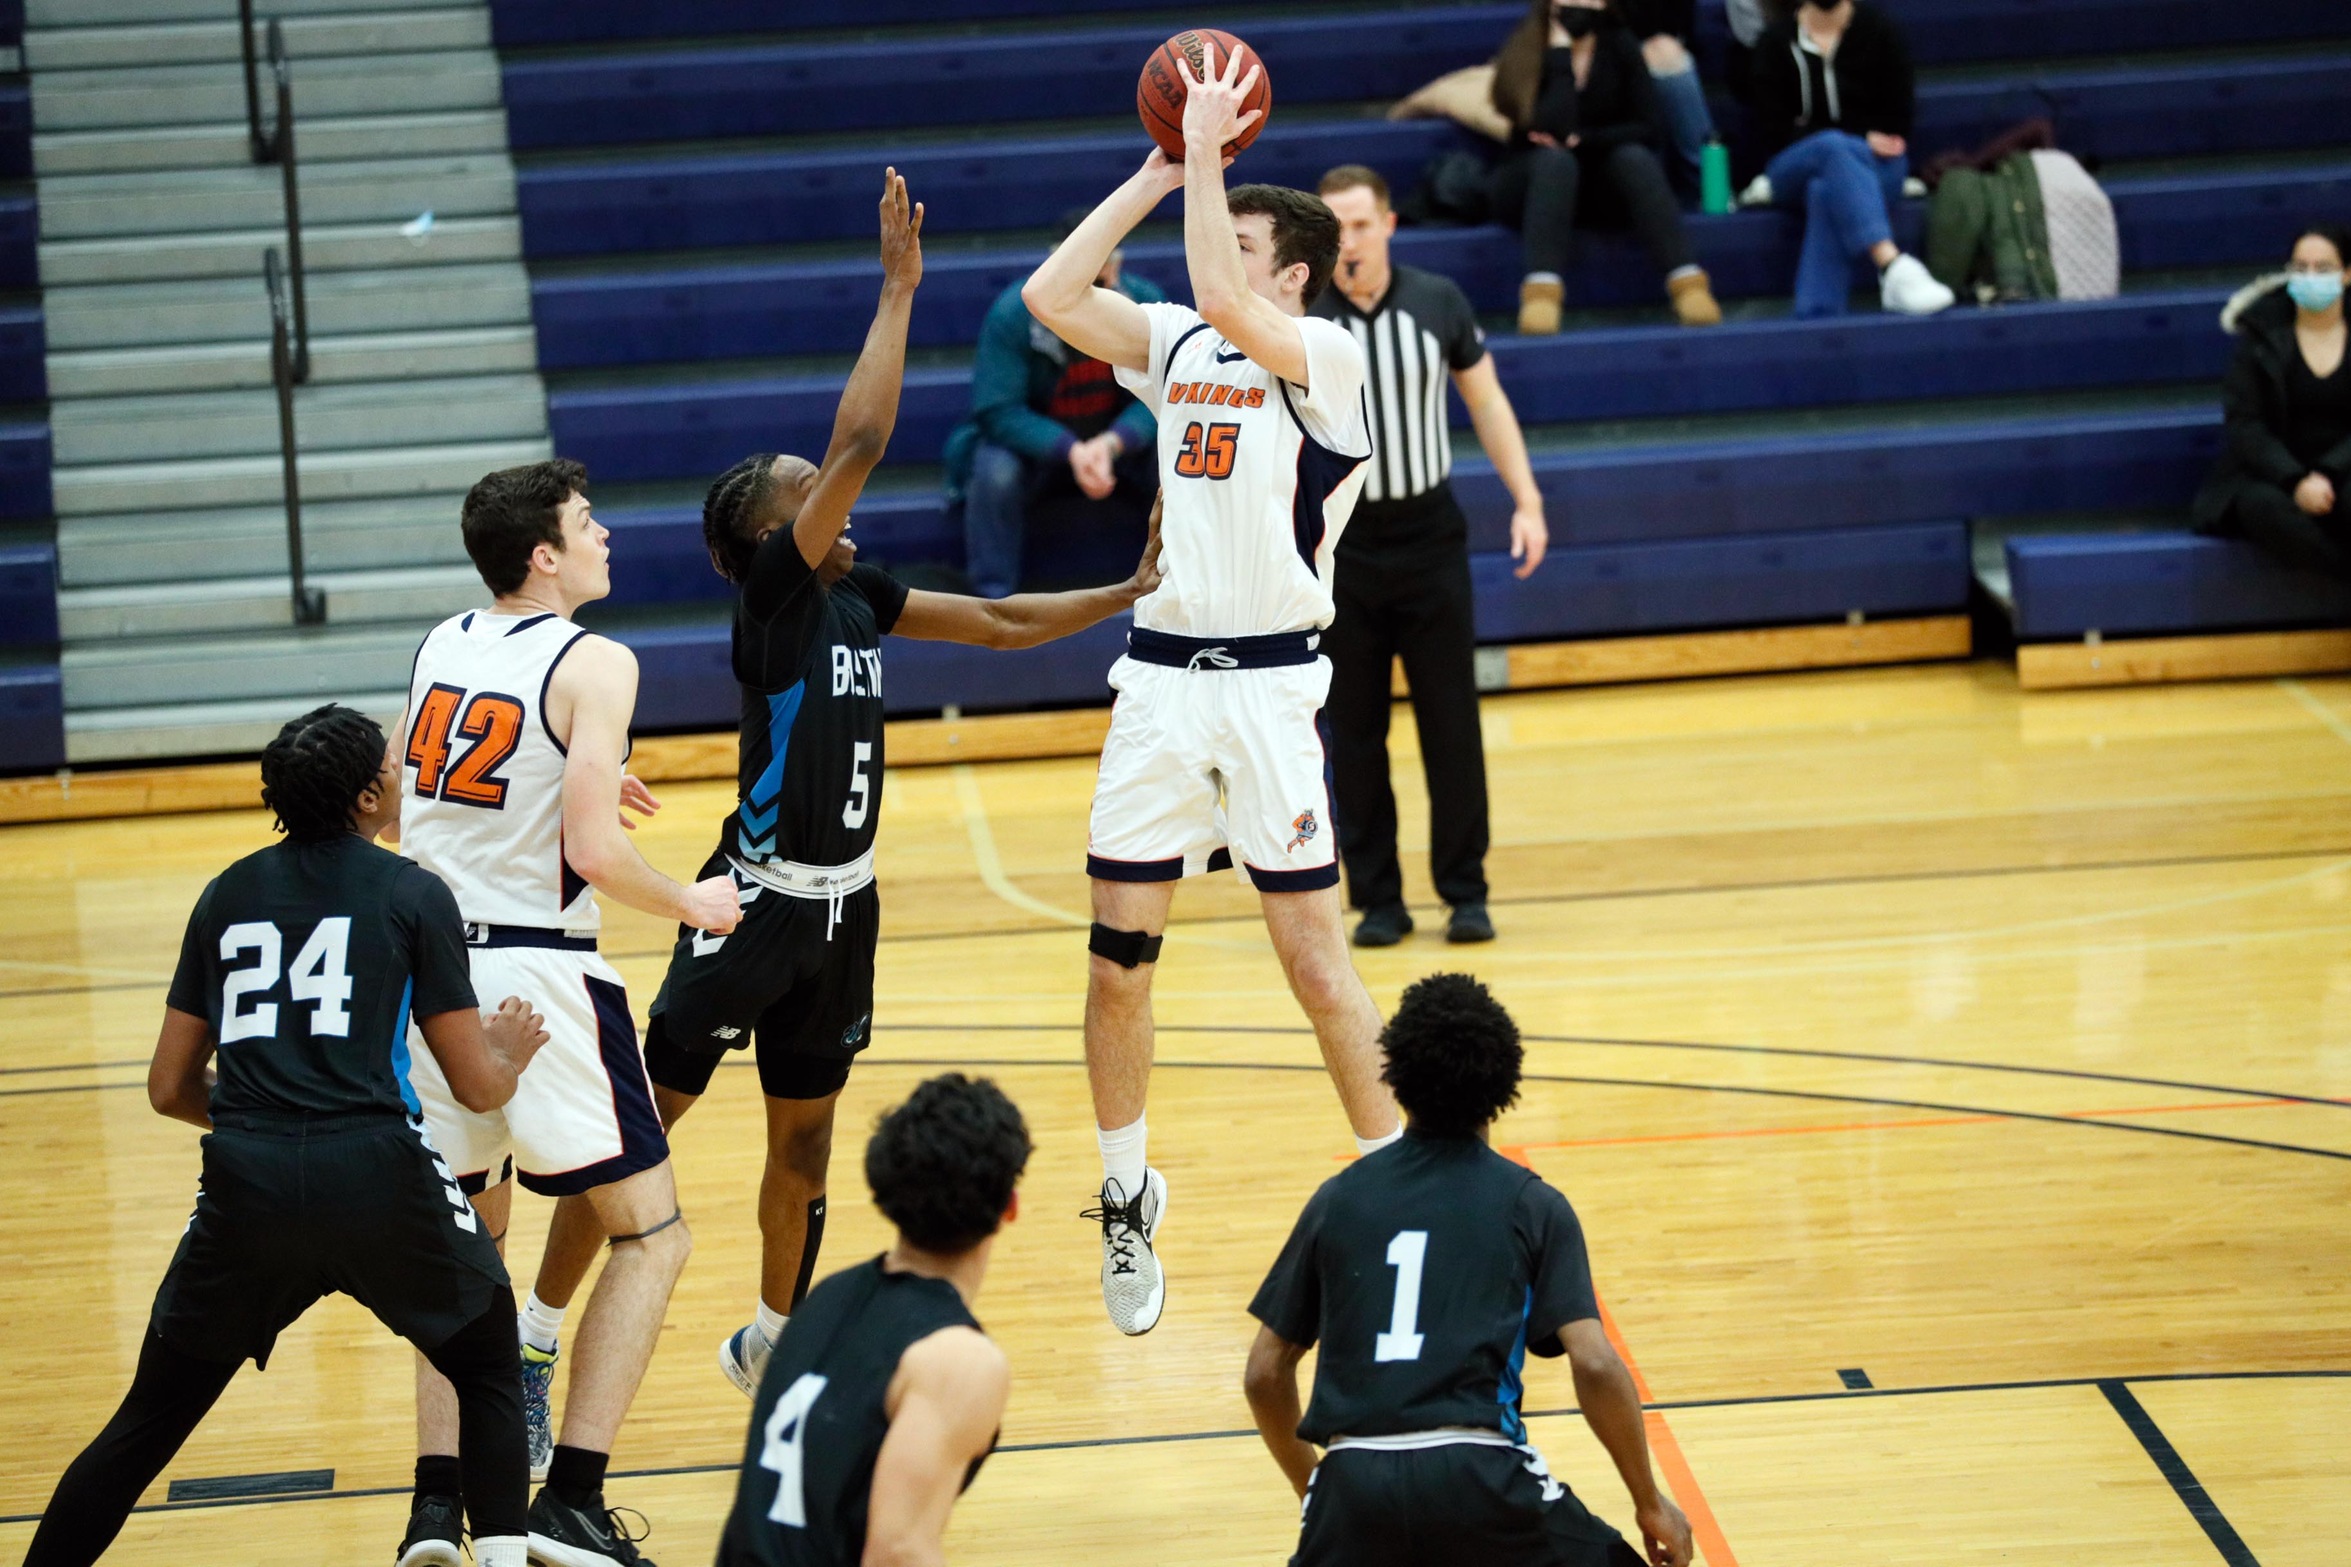 Men's Basketball Dominant in 101-55 Win Over Rams, Advance to MASCAC Semifinals